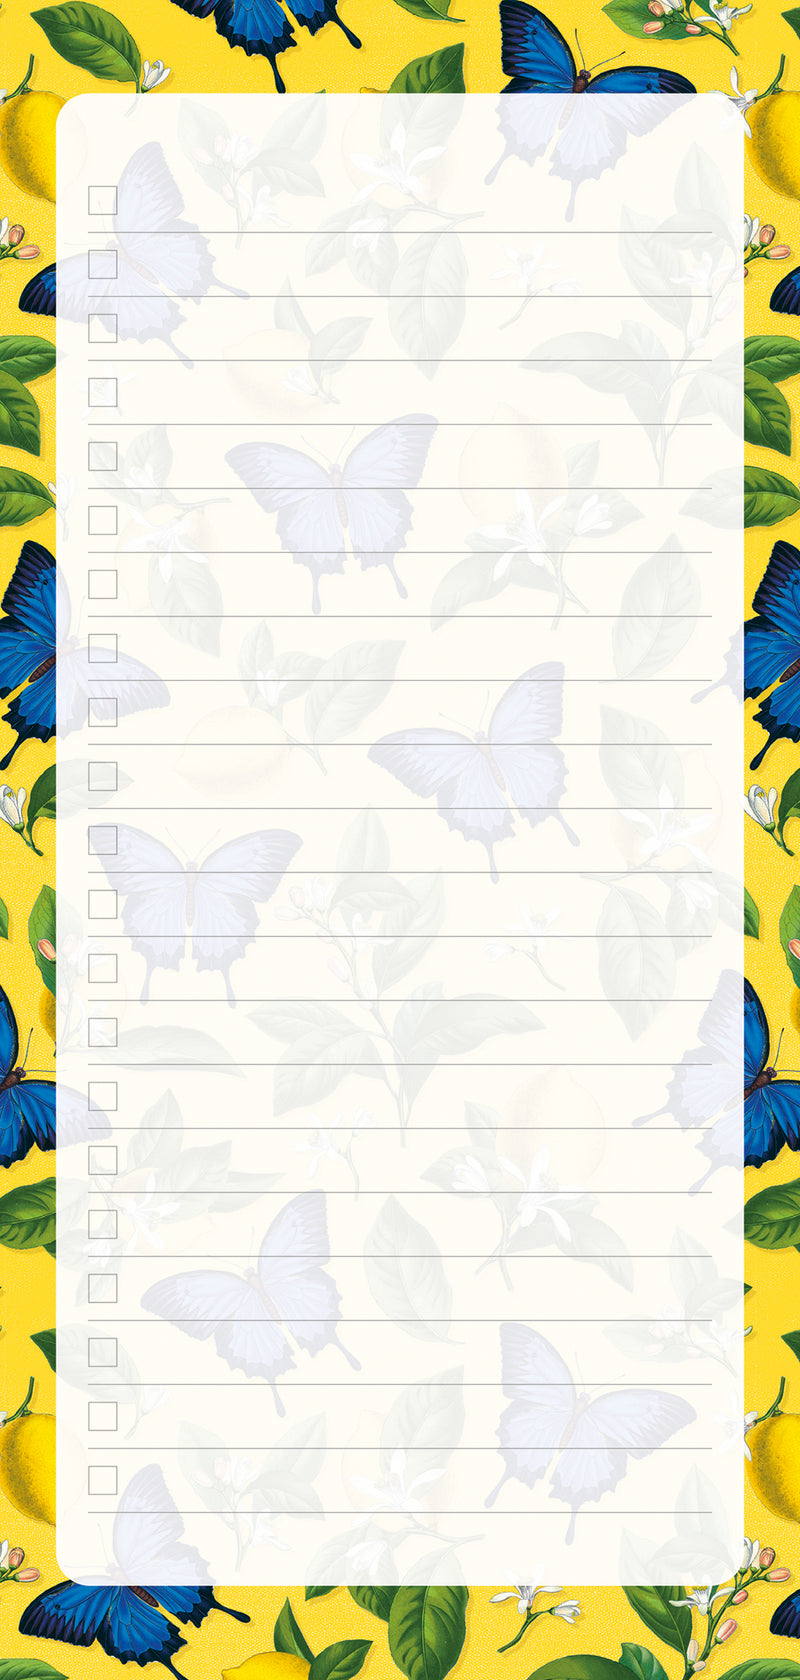 Natural History Museum Ulysses Butterfly Magnetic Fridge Notepad